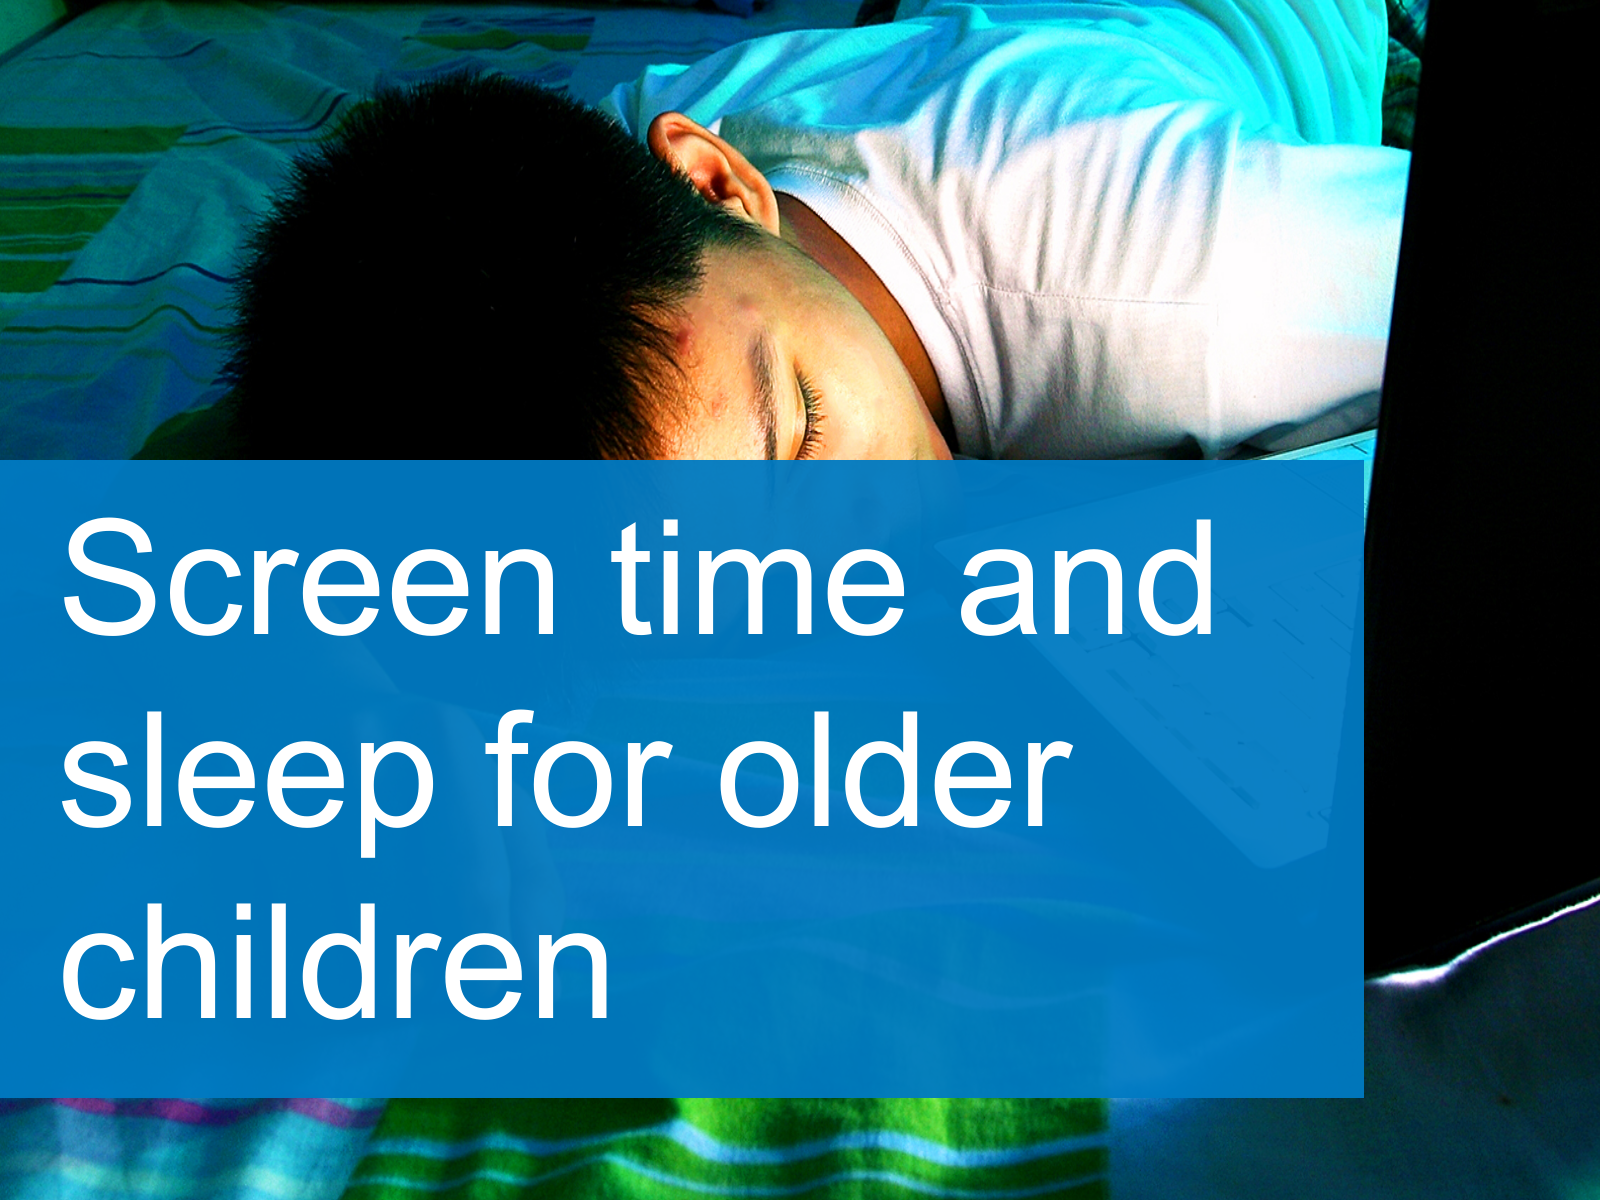 Screen time and sleep for older children